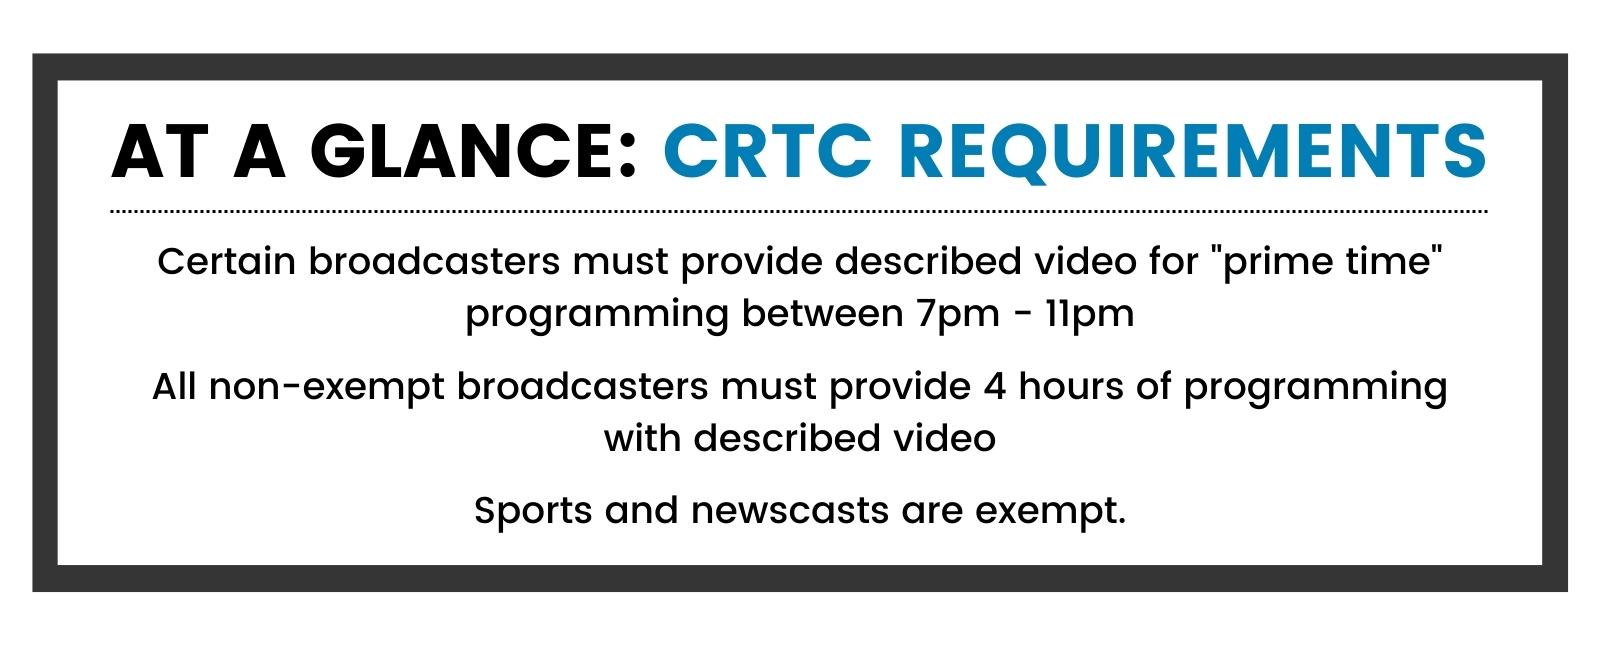 described video programming between 7 and 11pm (prime time), all non-exempt must provide 4 hours of described video programming, newscasts and sports are exempt.